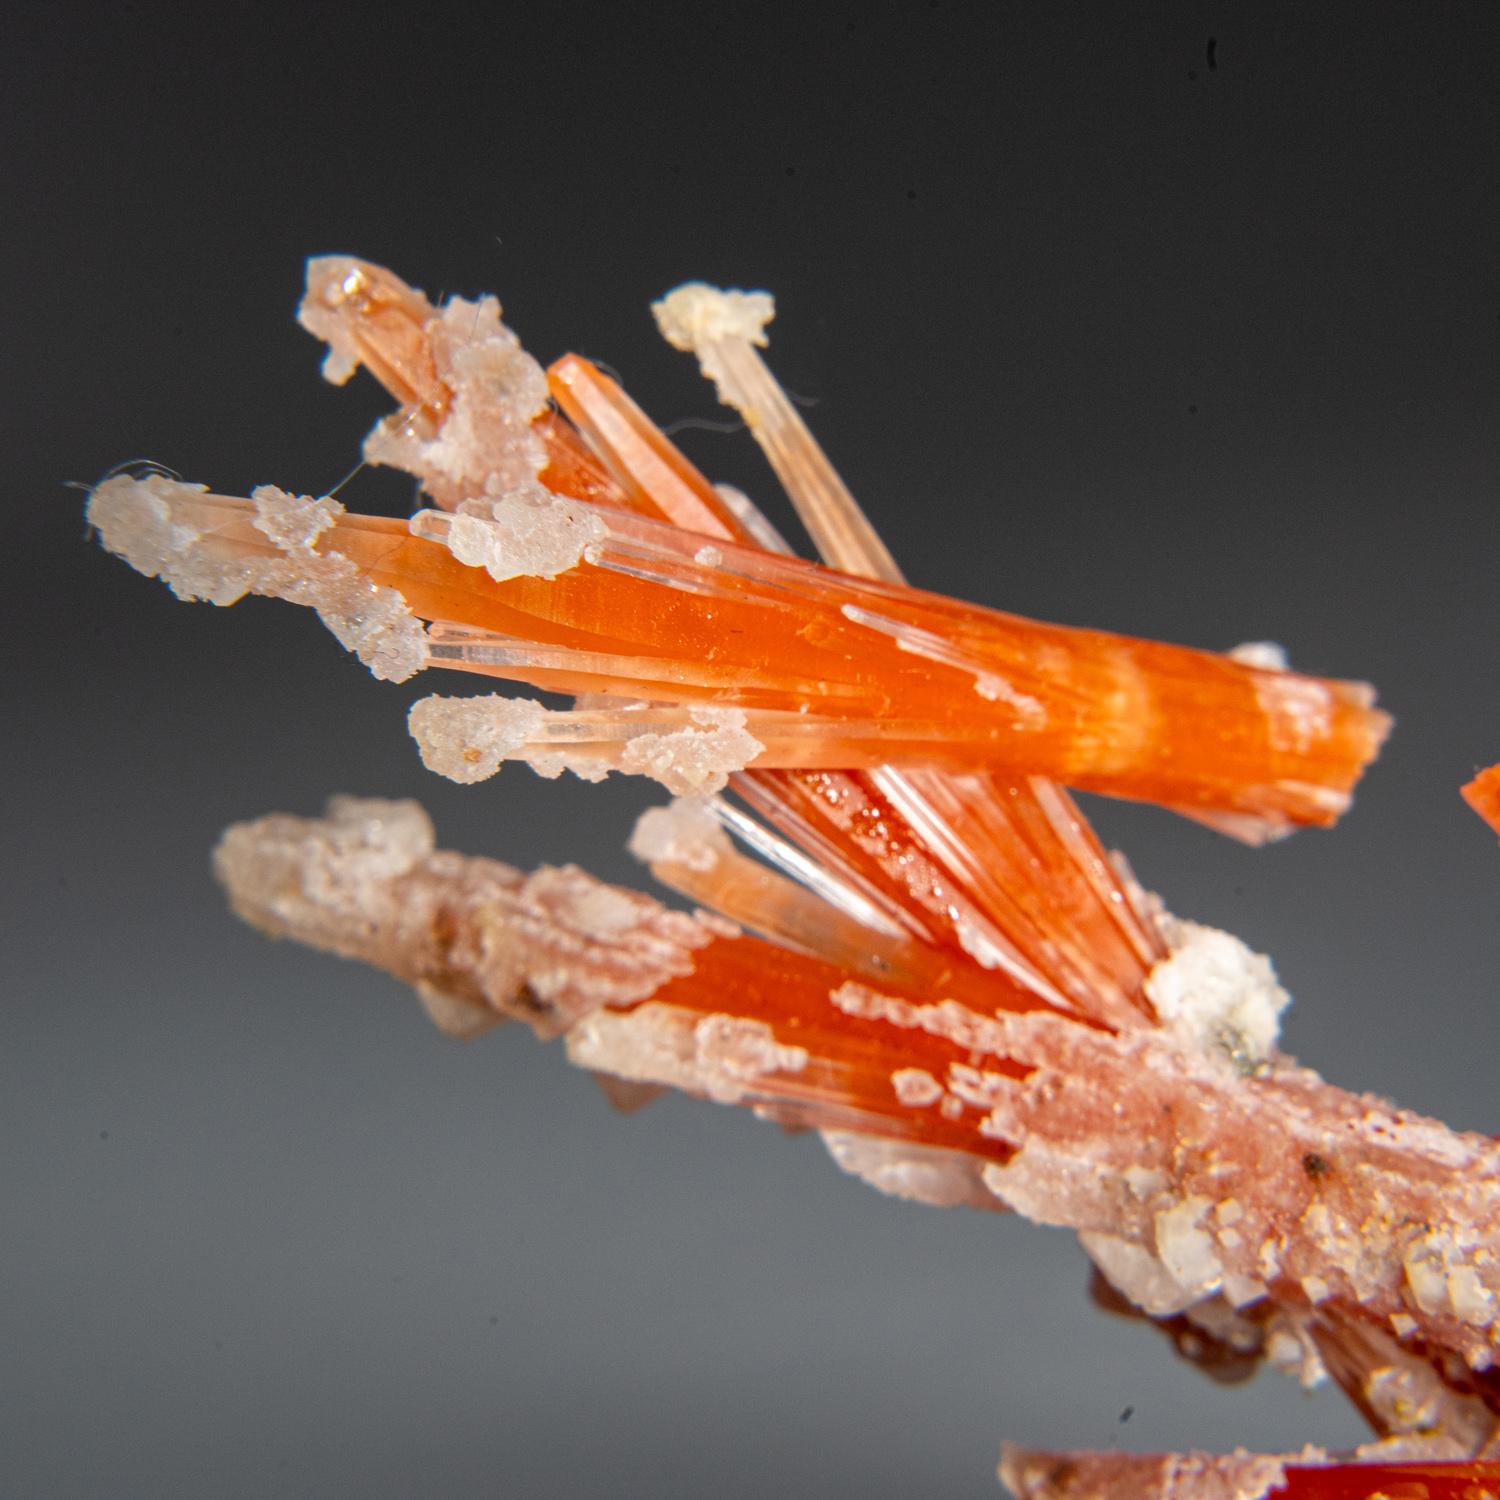 From Second Sovietskiy Mine, Dalnegorsk, Primorskiy Kray, Russia

Translucent orange quartz crystals to long embedded in contrasting white quartz. The orange color of the quartz is caused by microscopic hematite inclusions.

 

Weight: 16.2 grams,